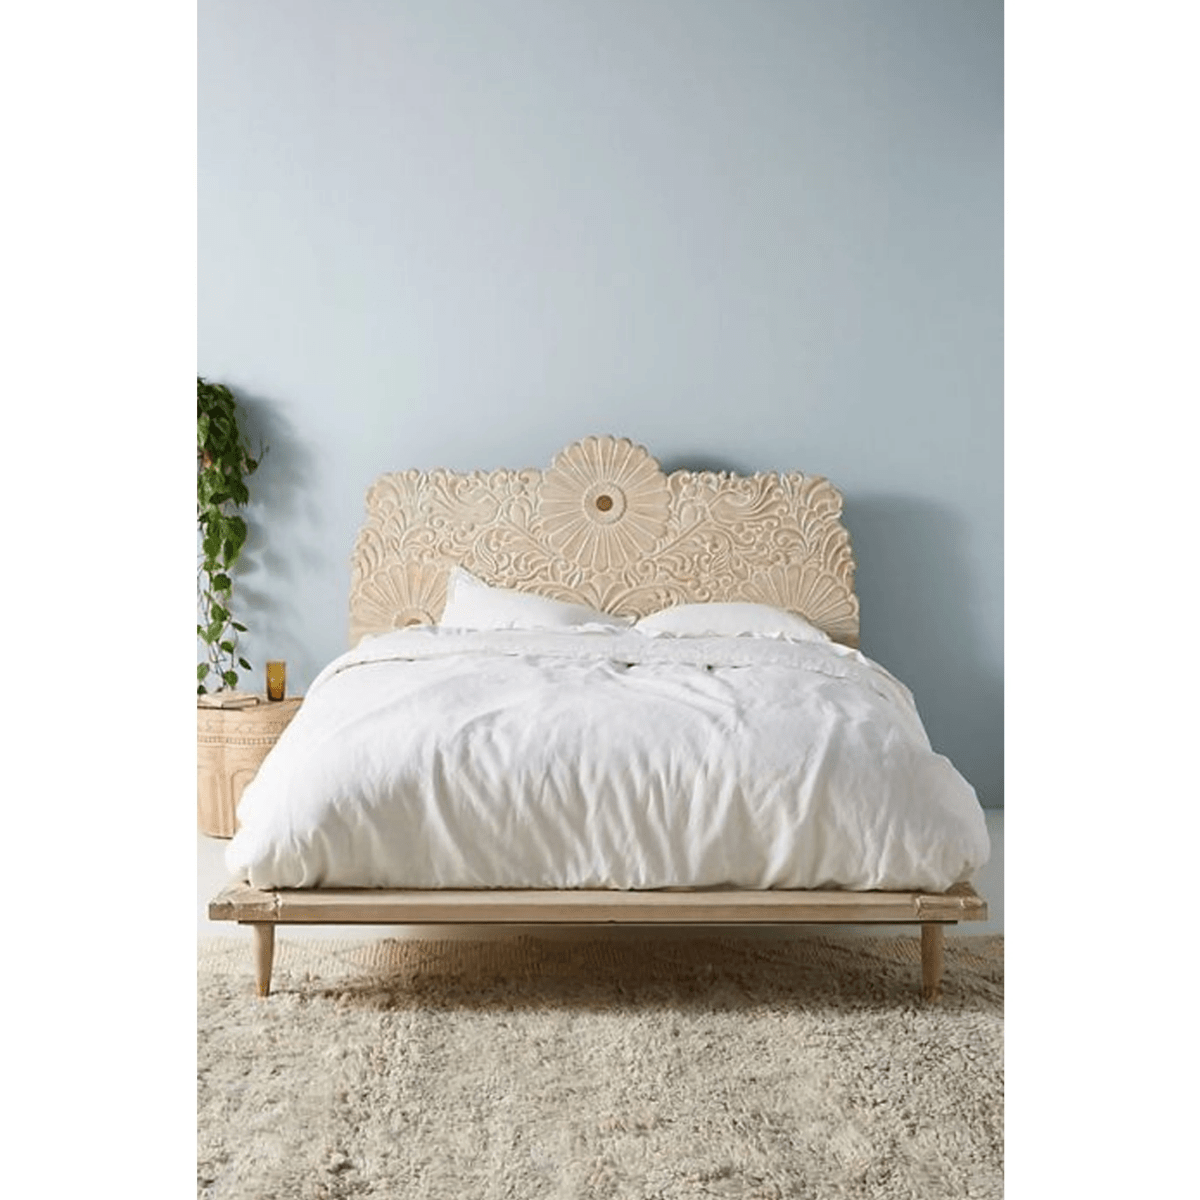 Bohemian Style Floral Queen Bed